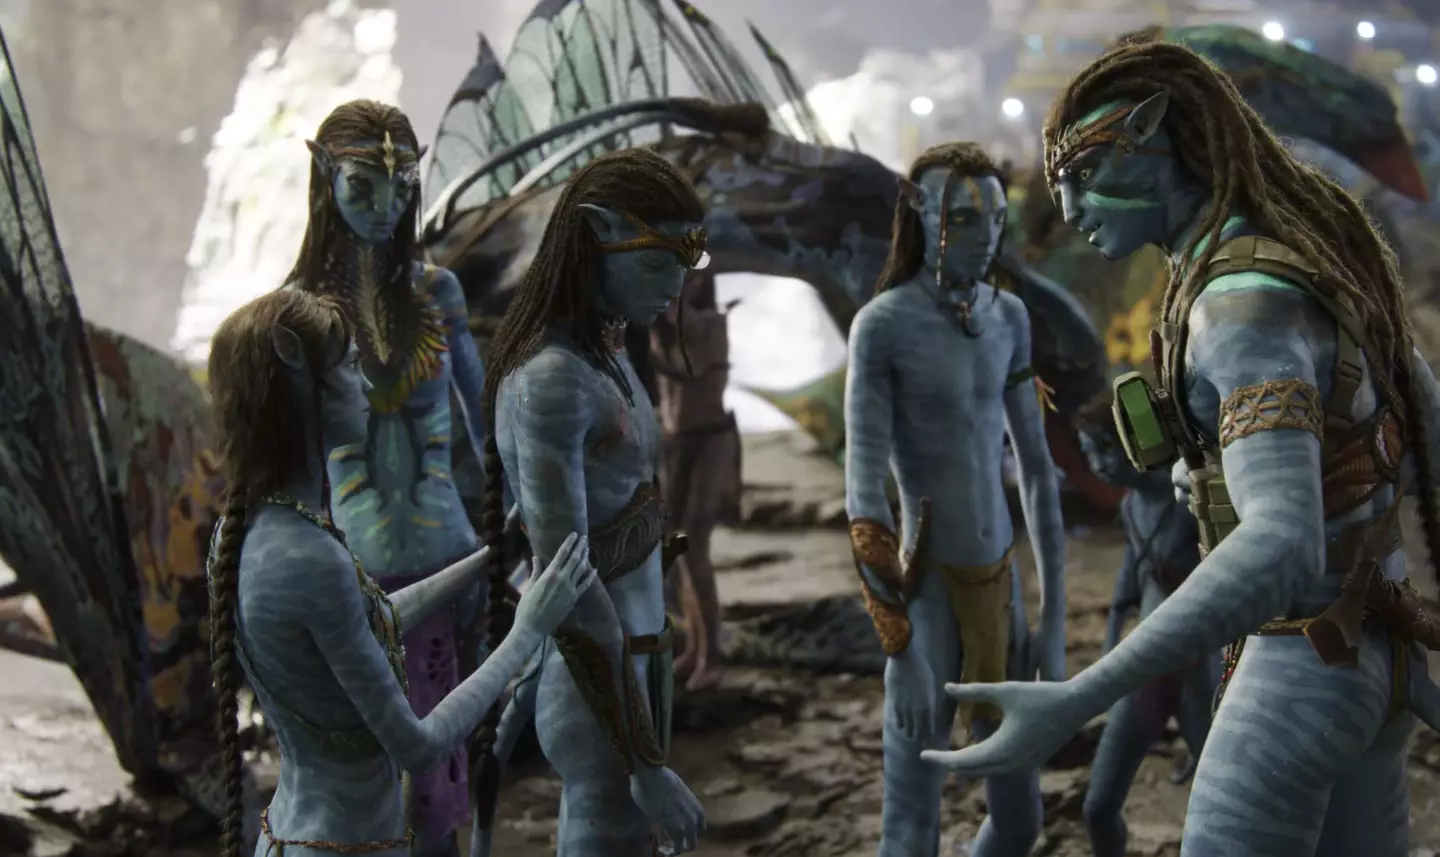 Avatar fans will have to wait until 2031 to finish the franchise.